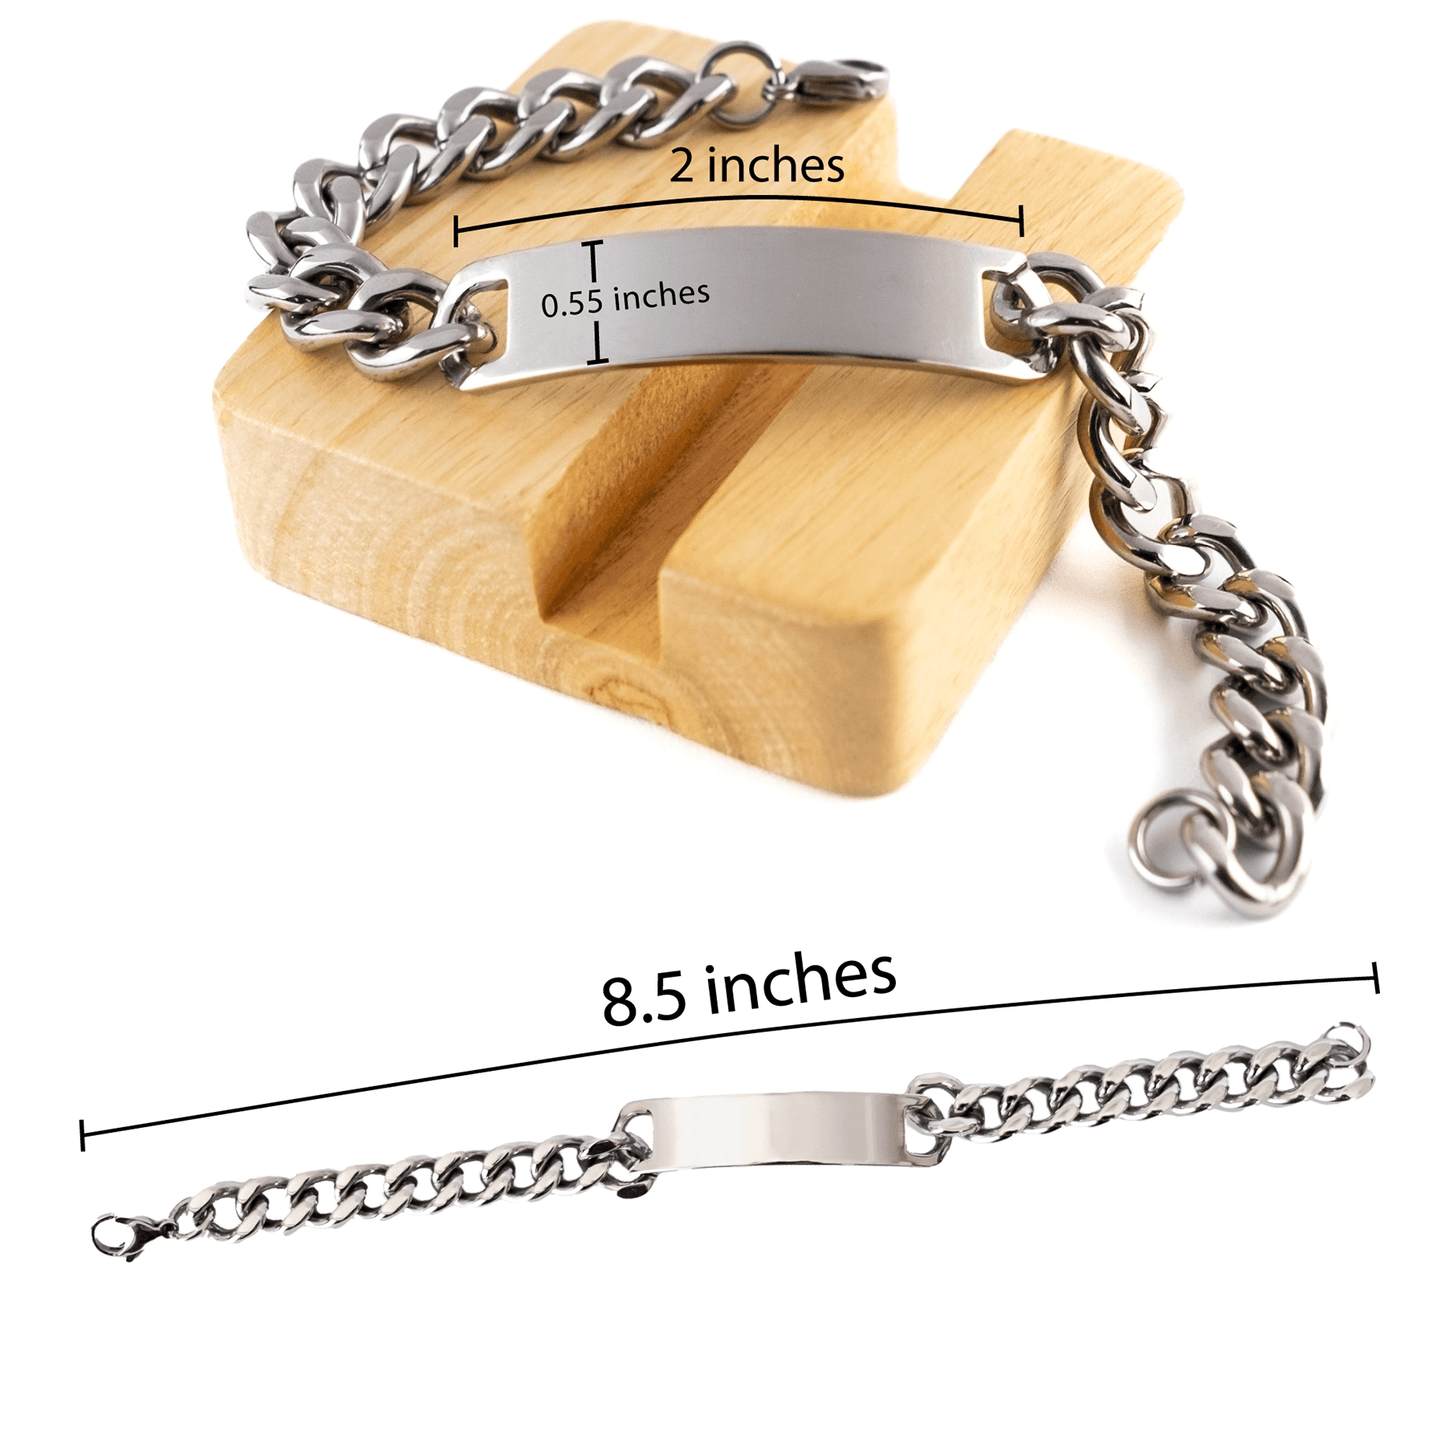 Remarkable Developer Gifts, Your dedication and hard work, Inspirational Birthday Christmas Unique Cuban Chain Stainless Steel Bracelet For Developer, Coworkers, Men, Women, Friends - Mallard Moon Gift Shop